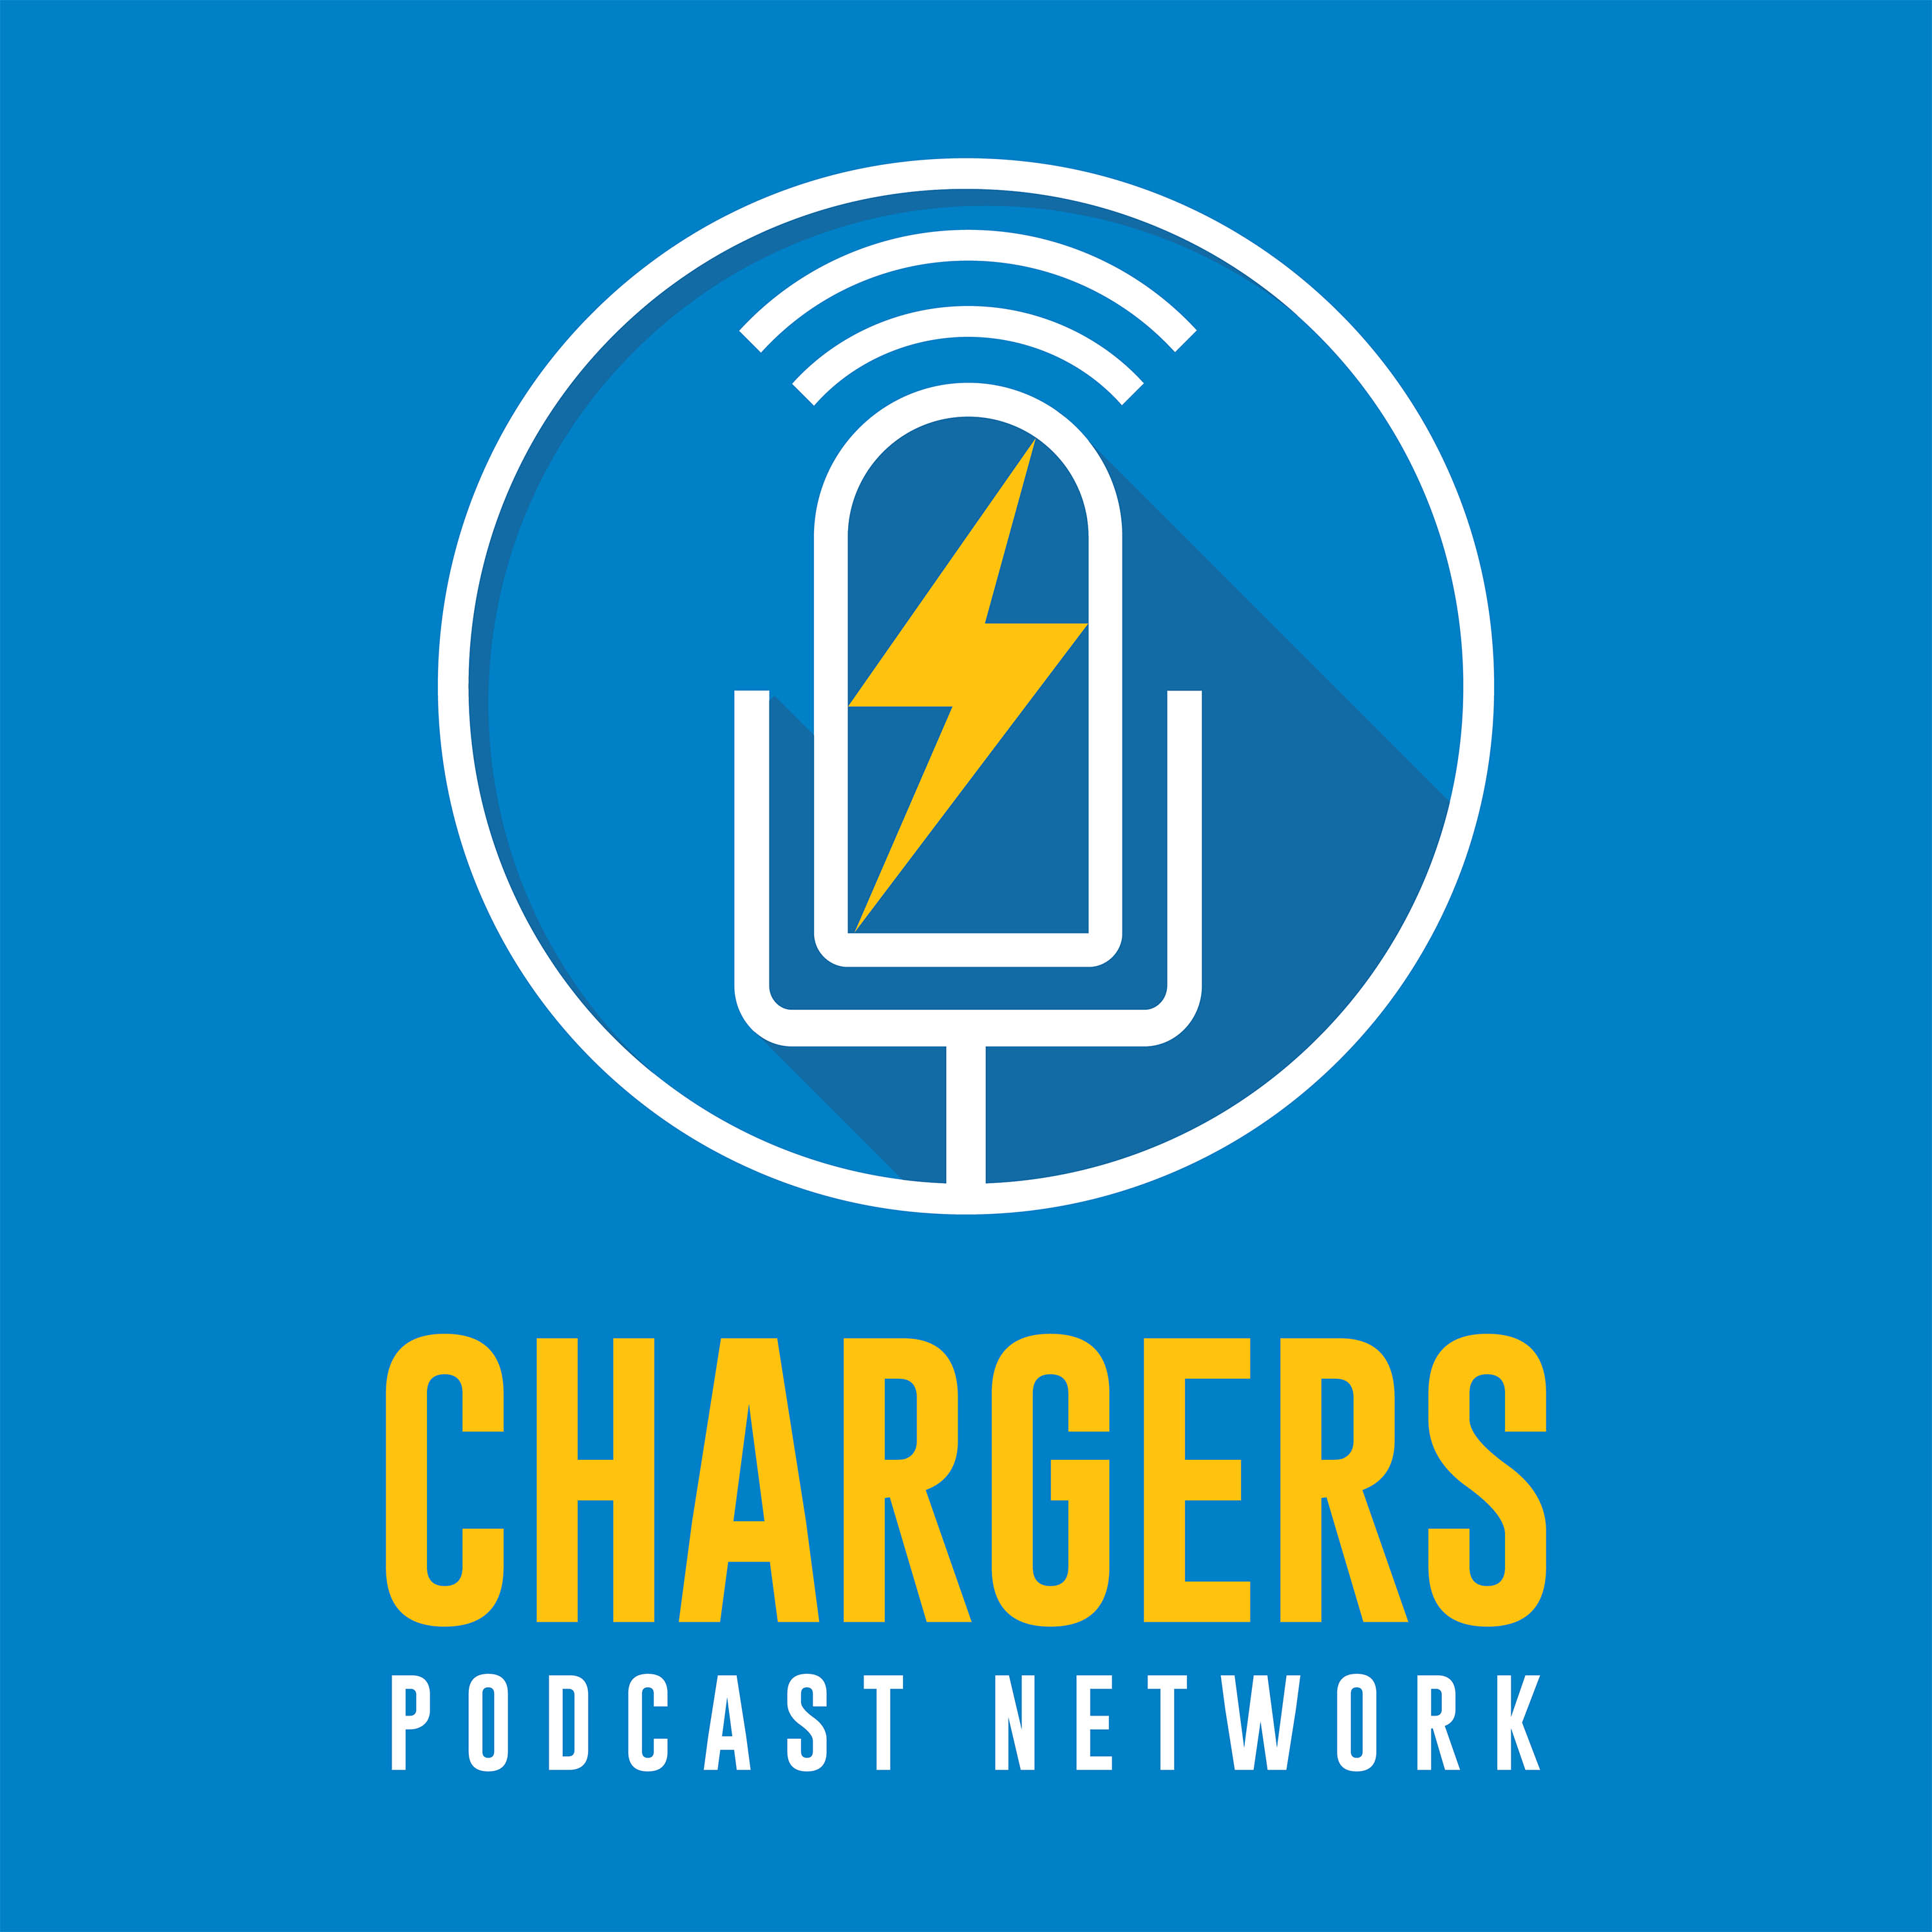 Chargers Weekly: Major Storylines and Keys to Victory vs. Cowboys on MNF